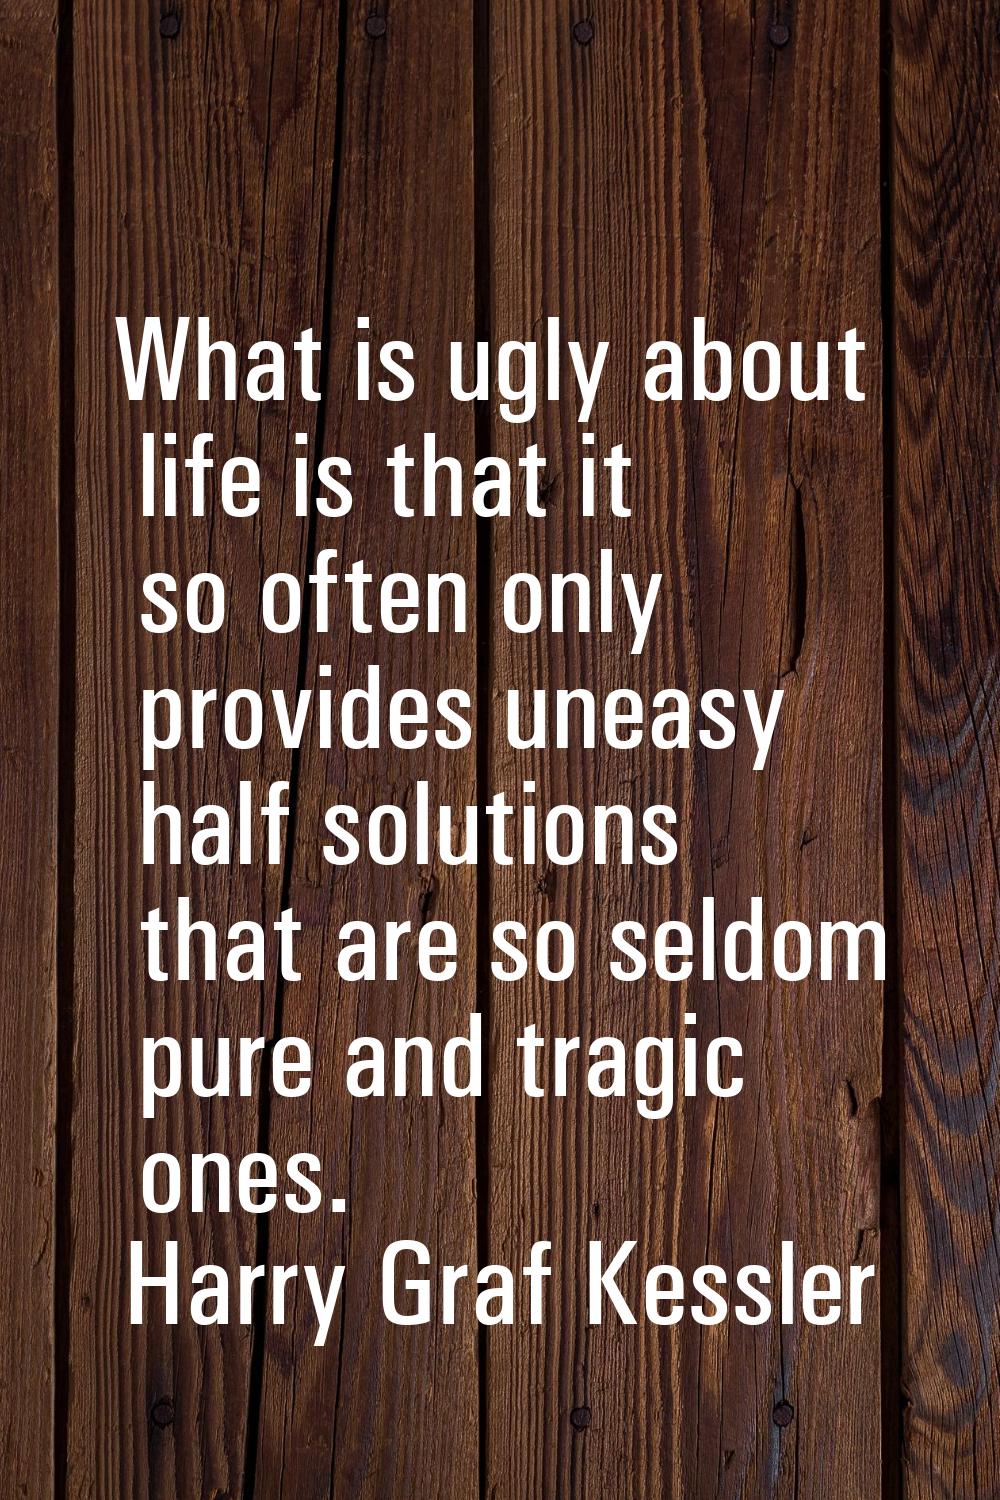 What is ugly about life is that it so often only provides uneasy half solutions that are so seldom 